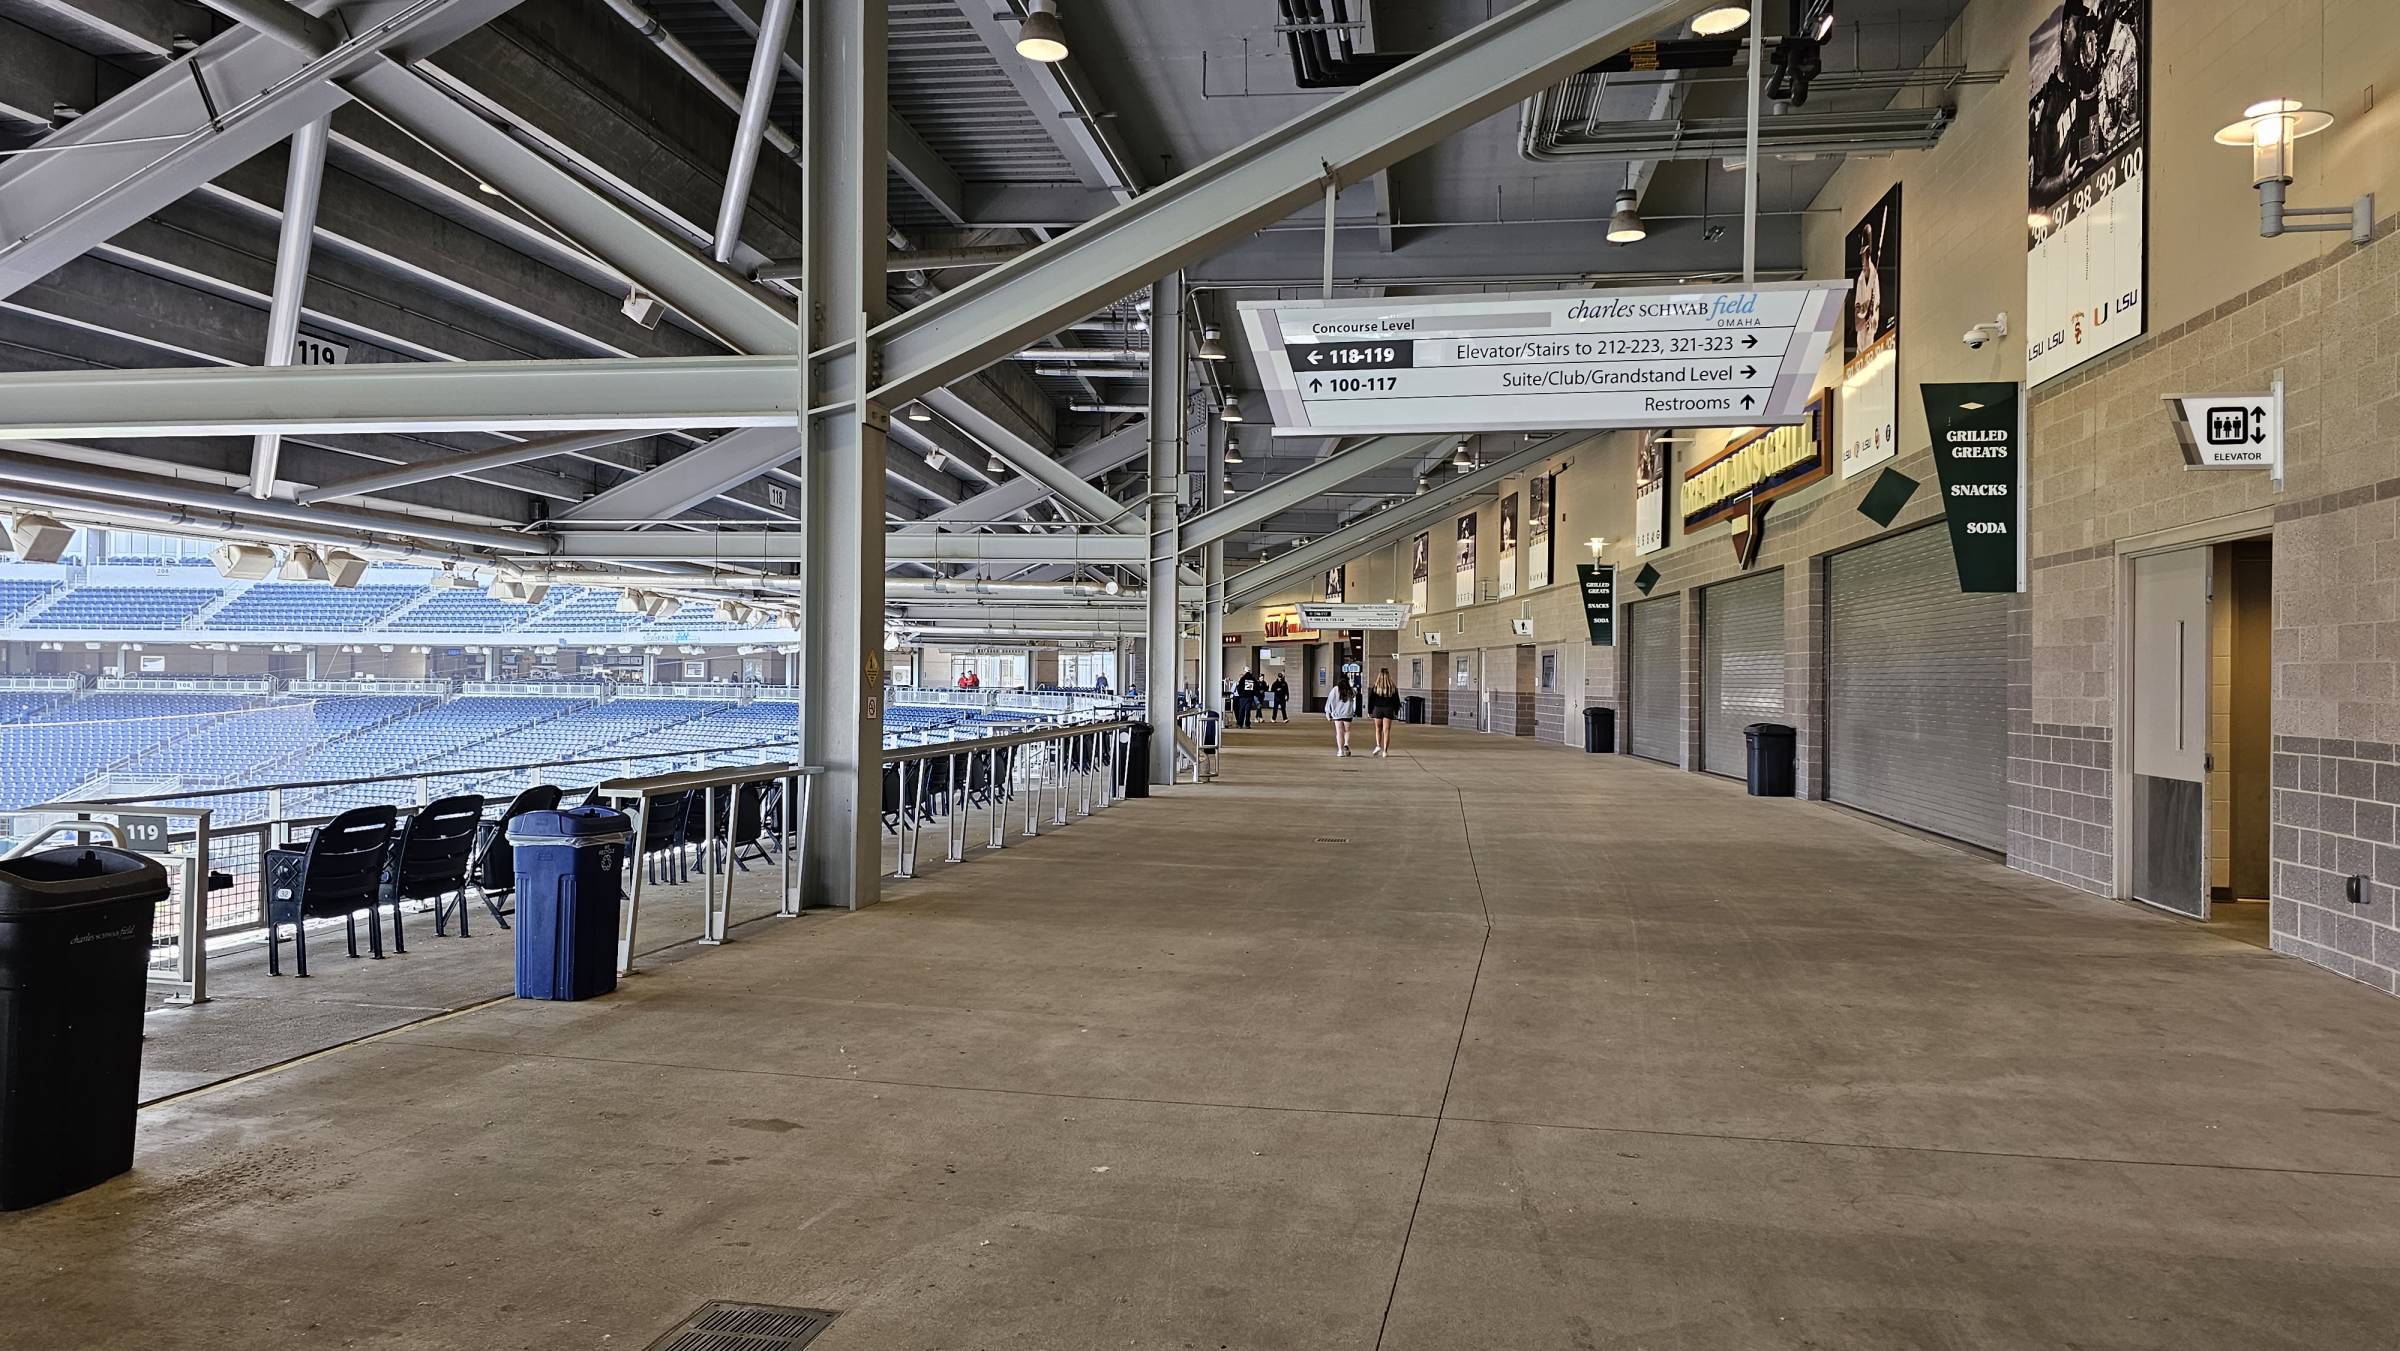 Main concourse at Charles Schwab Field